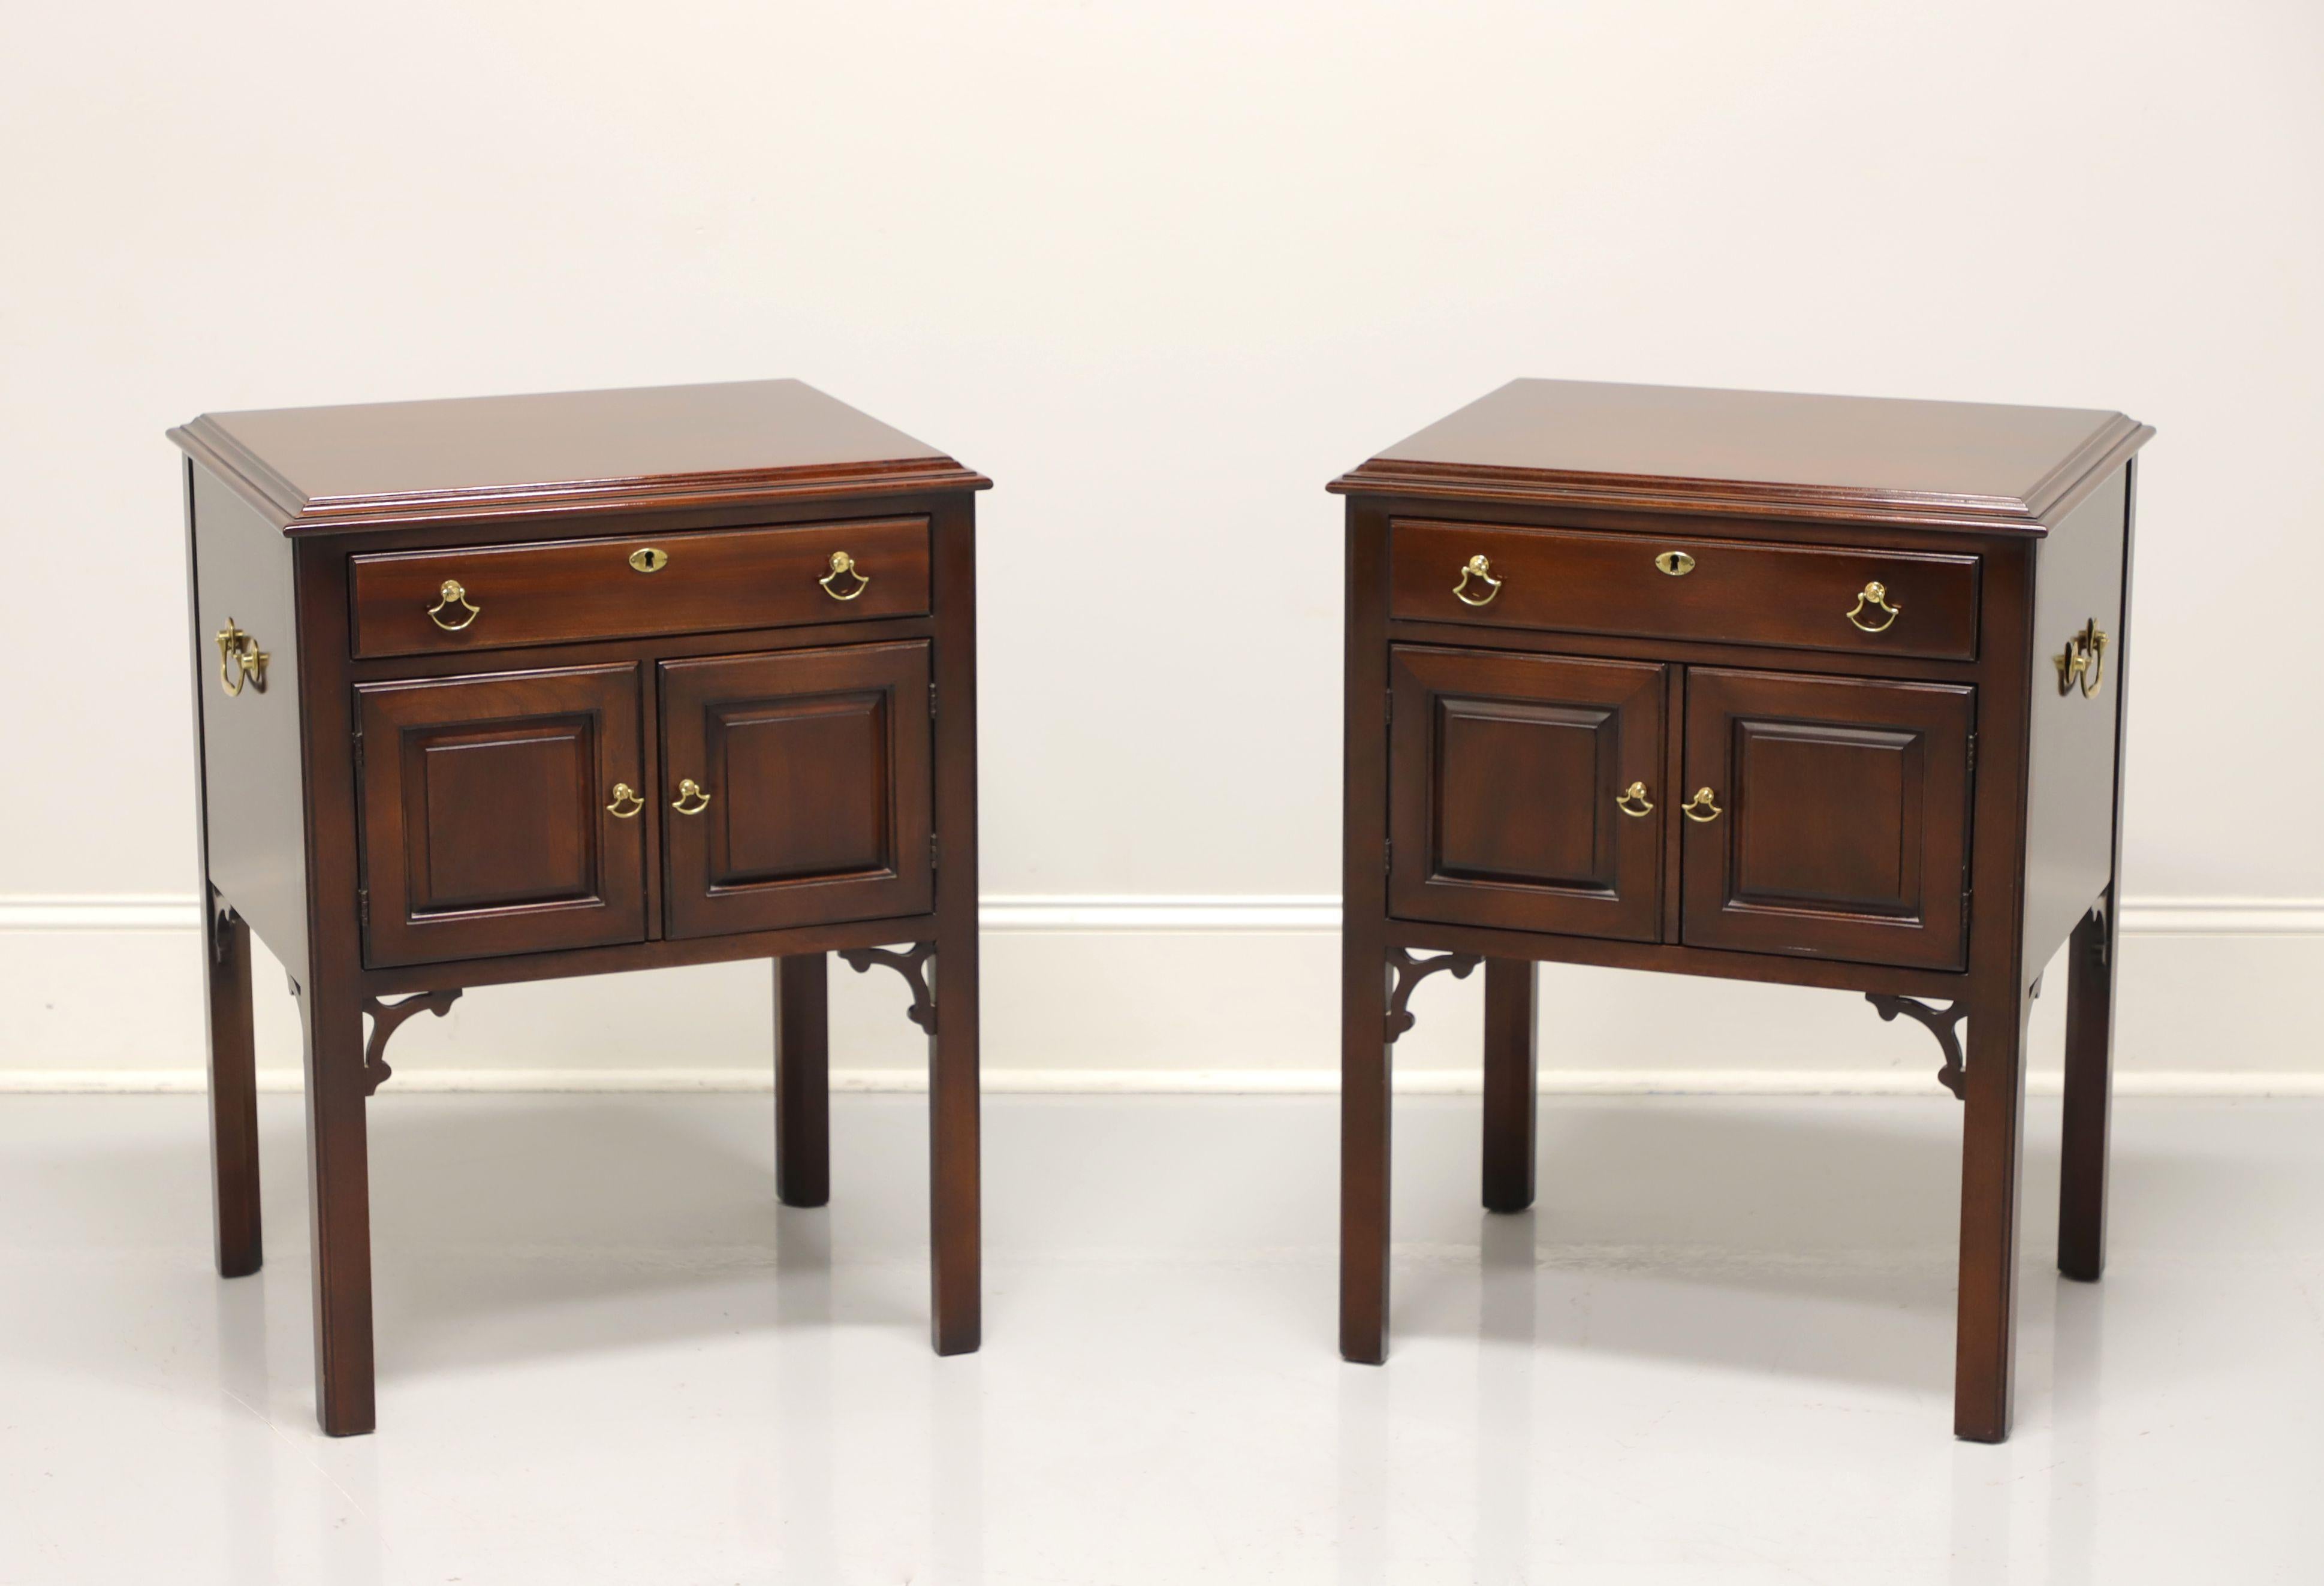 STATTON Old Towne Cherry Chippendale Style Nightstands - Pair 5